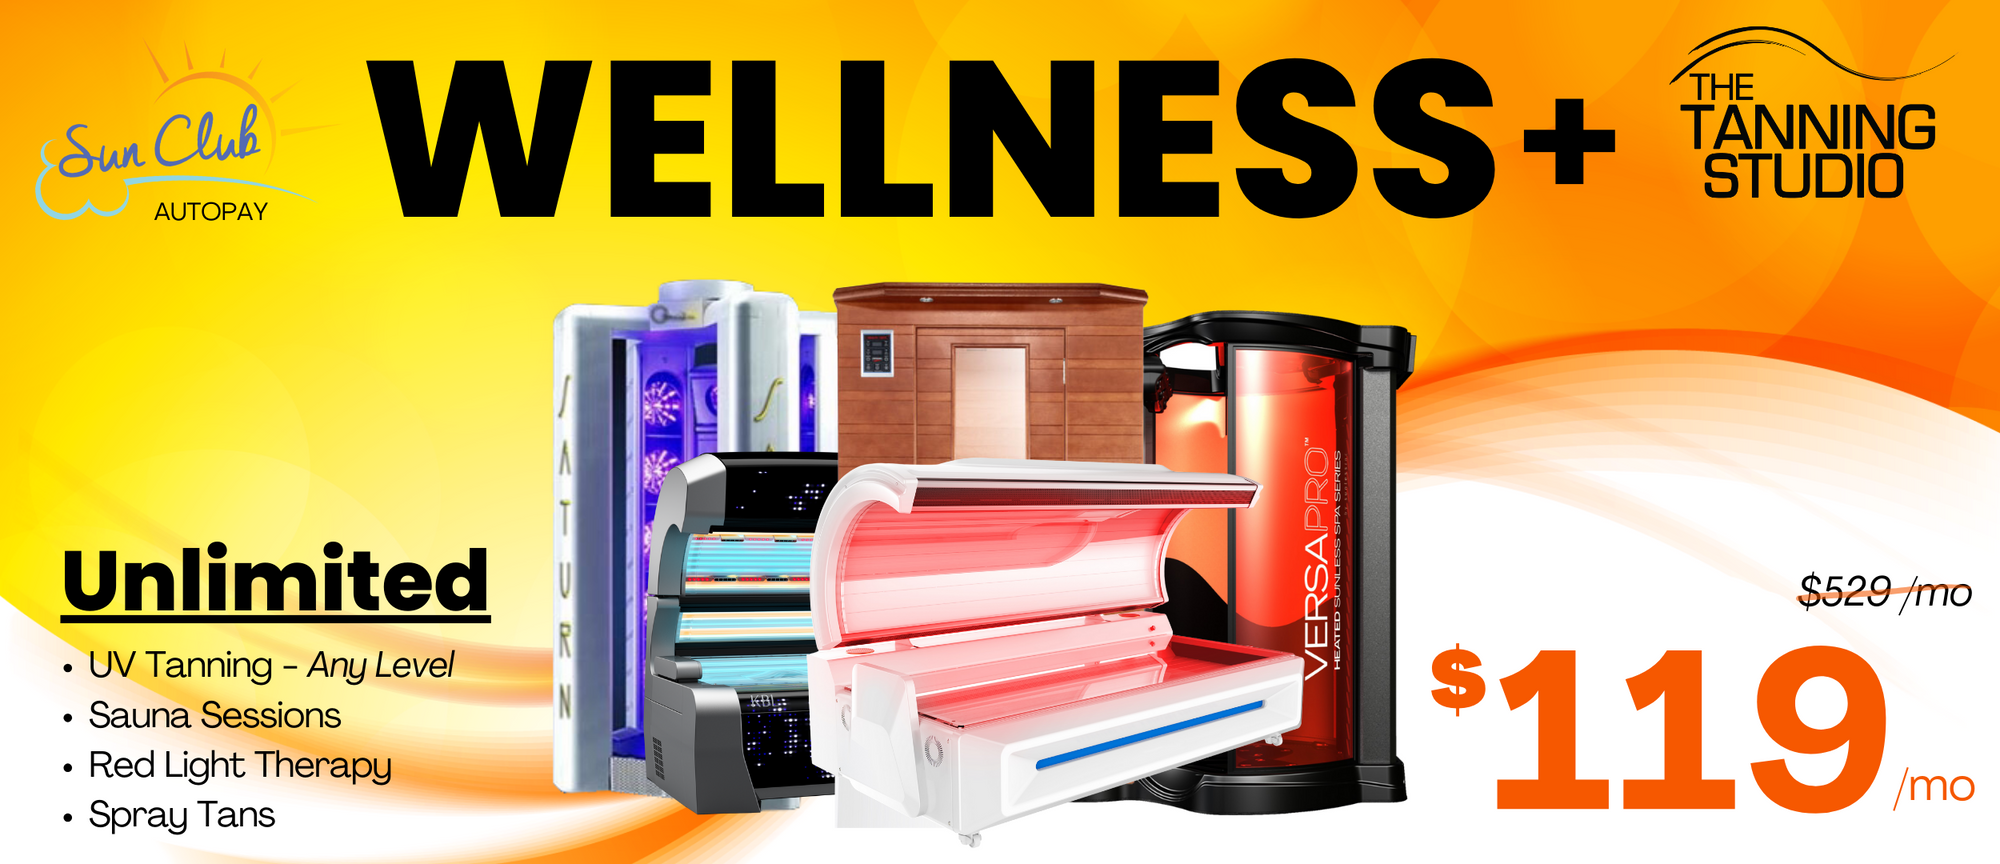 Wellness+ Sun Club Membership. Includes unlimited UV Tanning (any level), Sauna Sessions, Red Light Therapy, & Spray Tans. ONLY $119/mo, regular price $529/mo